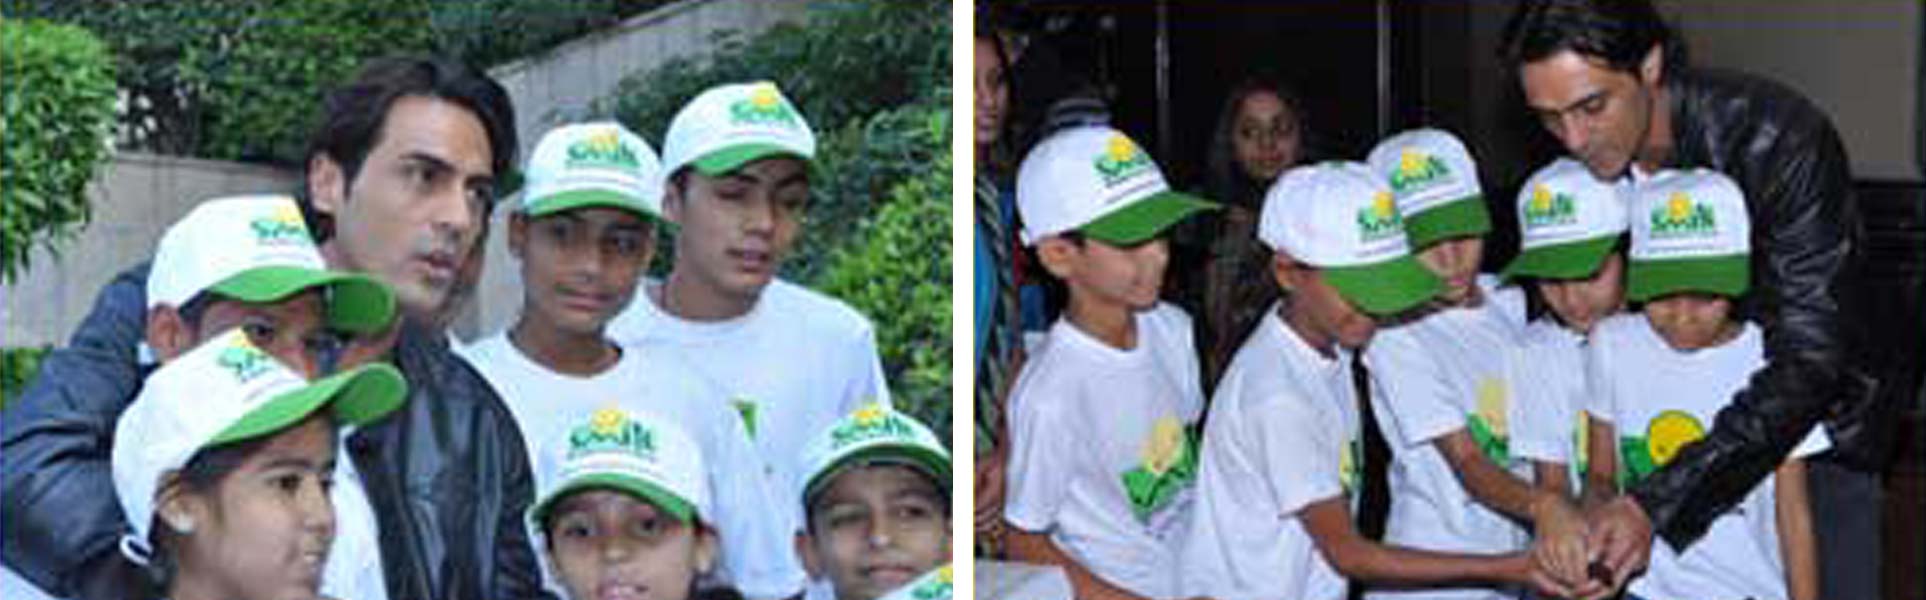 Arjun Rampal celebrates Children's Day and Ra.One success with Smile Foundation